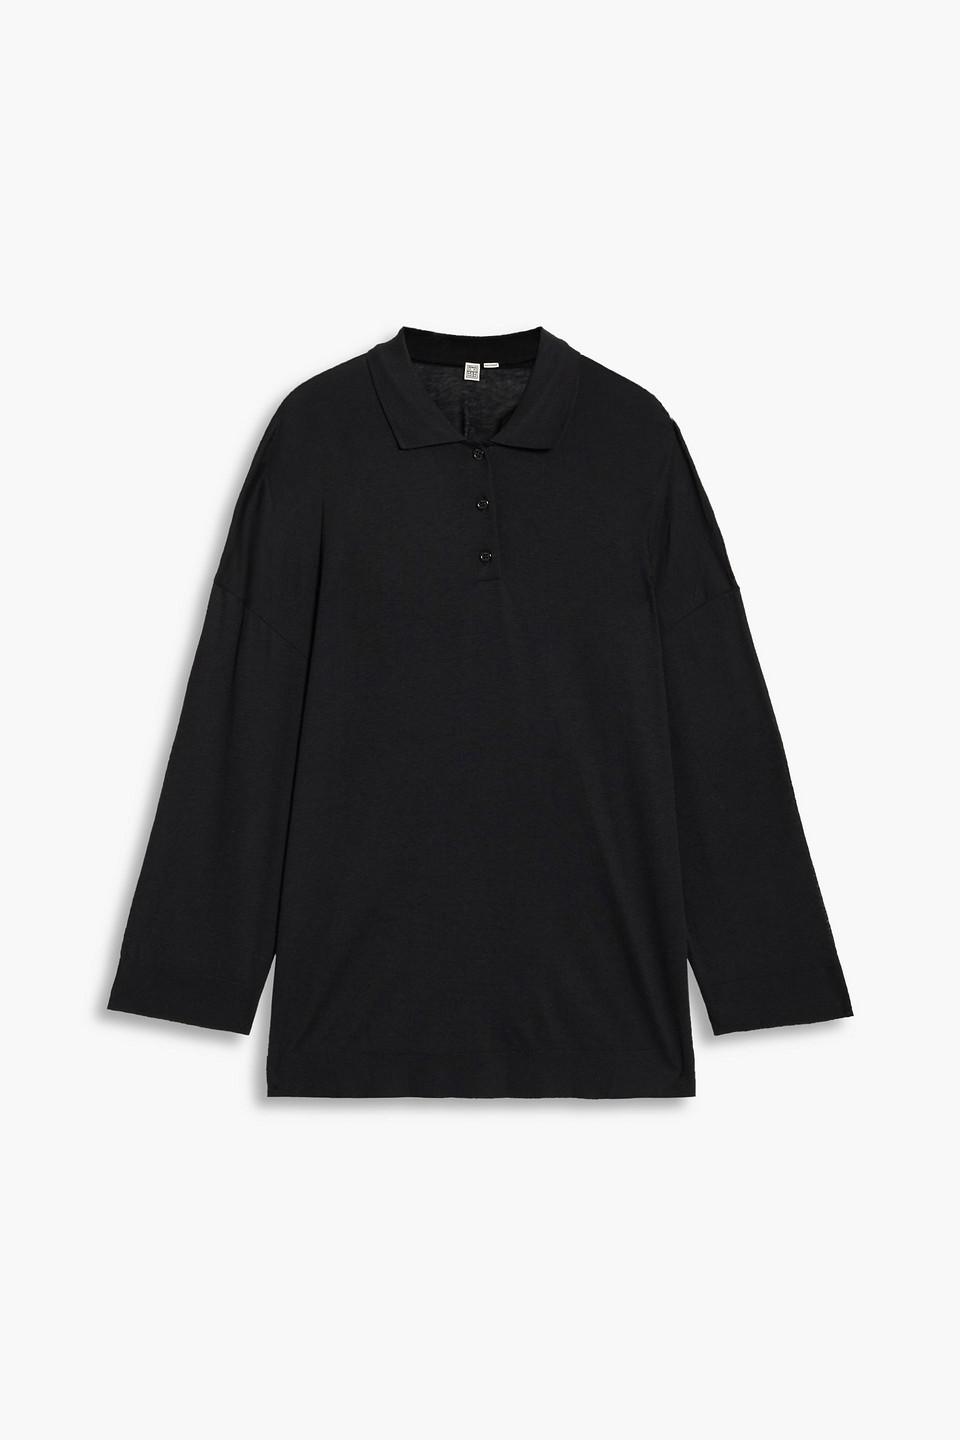 Totême Lyocell And Cotton-blend Jersey Polo Shirt in Black | Lyst